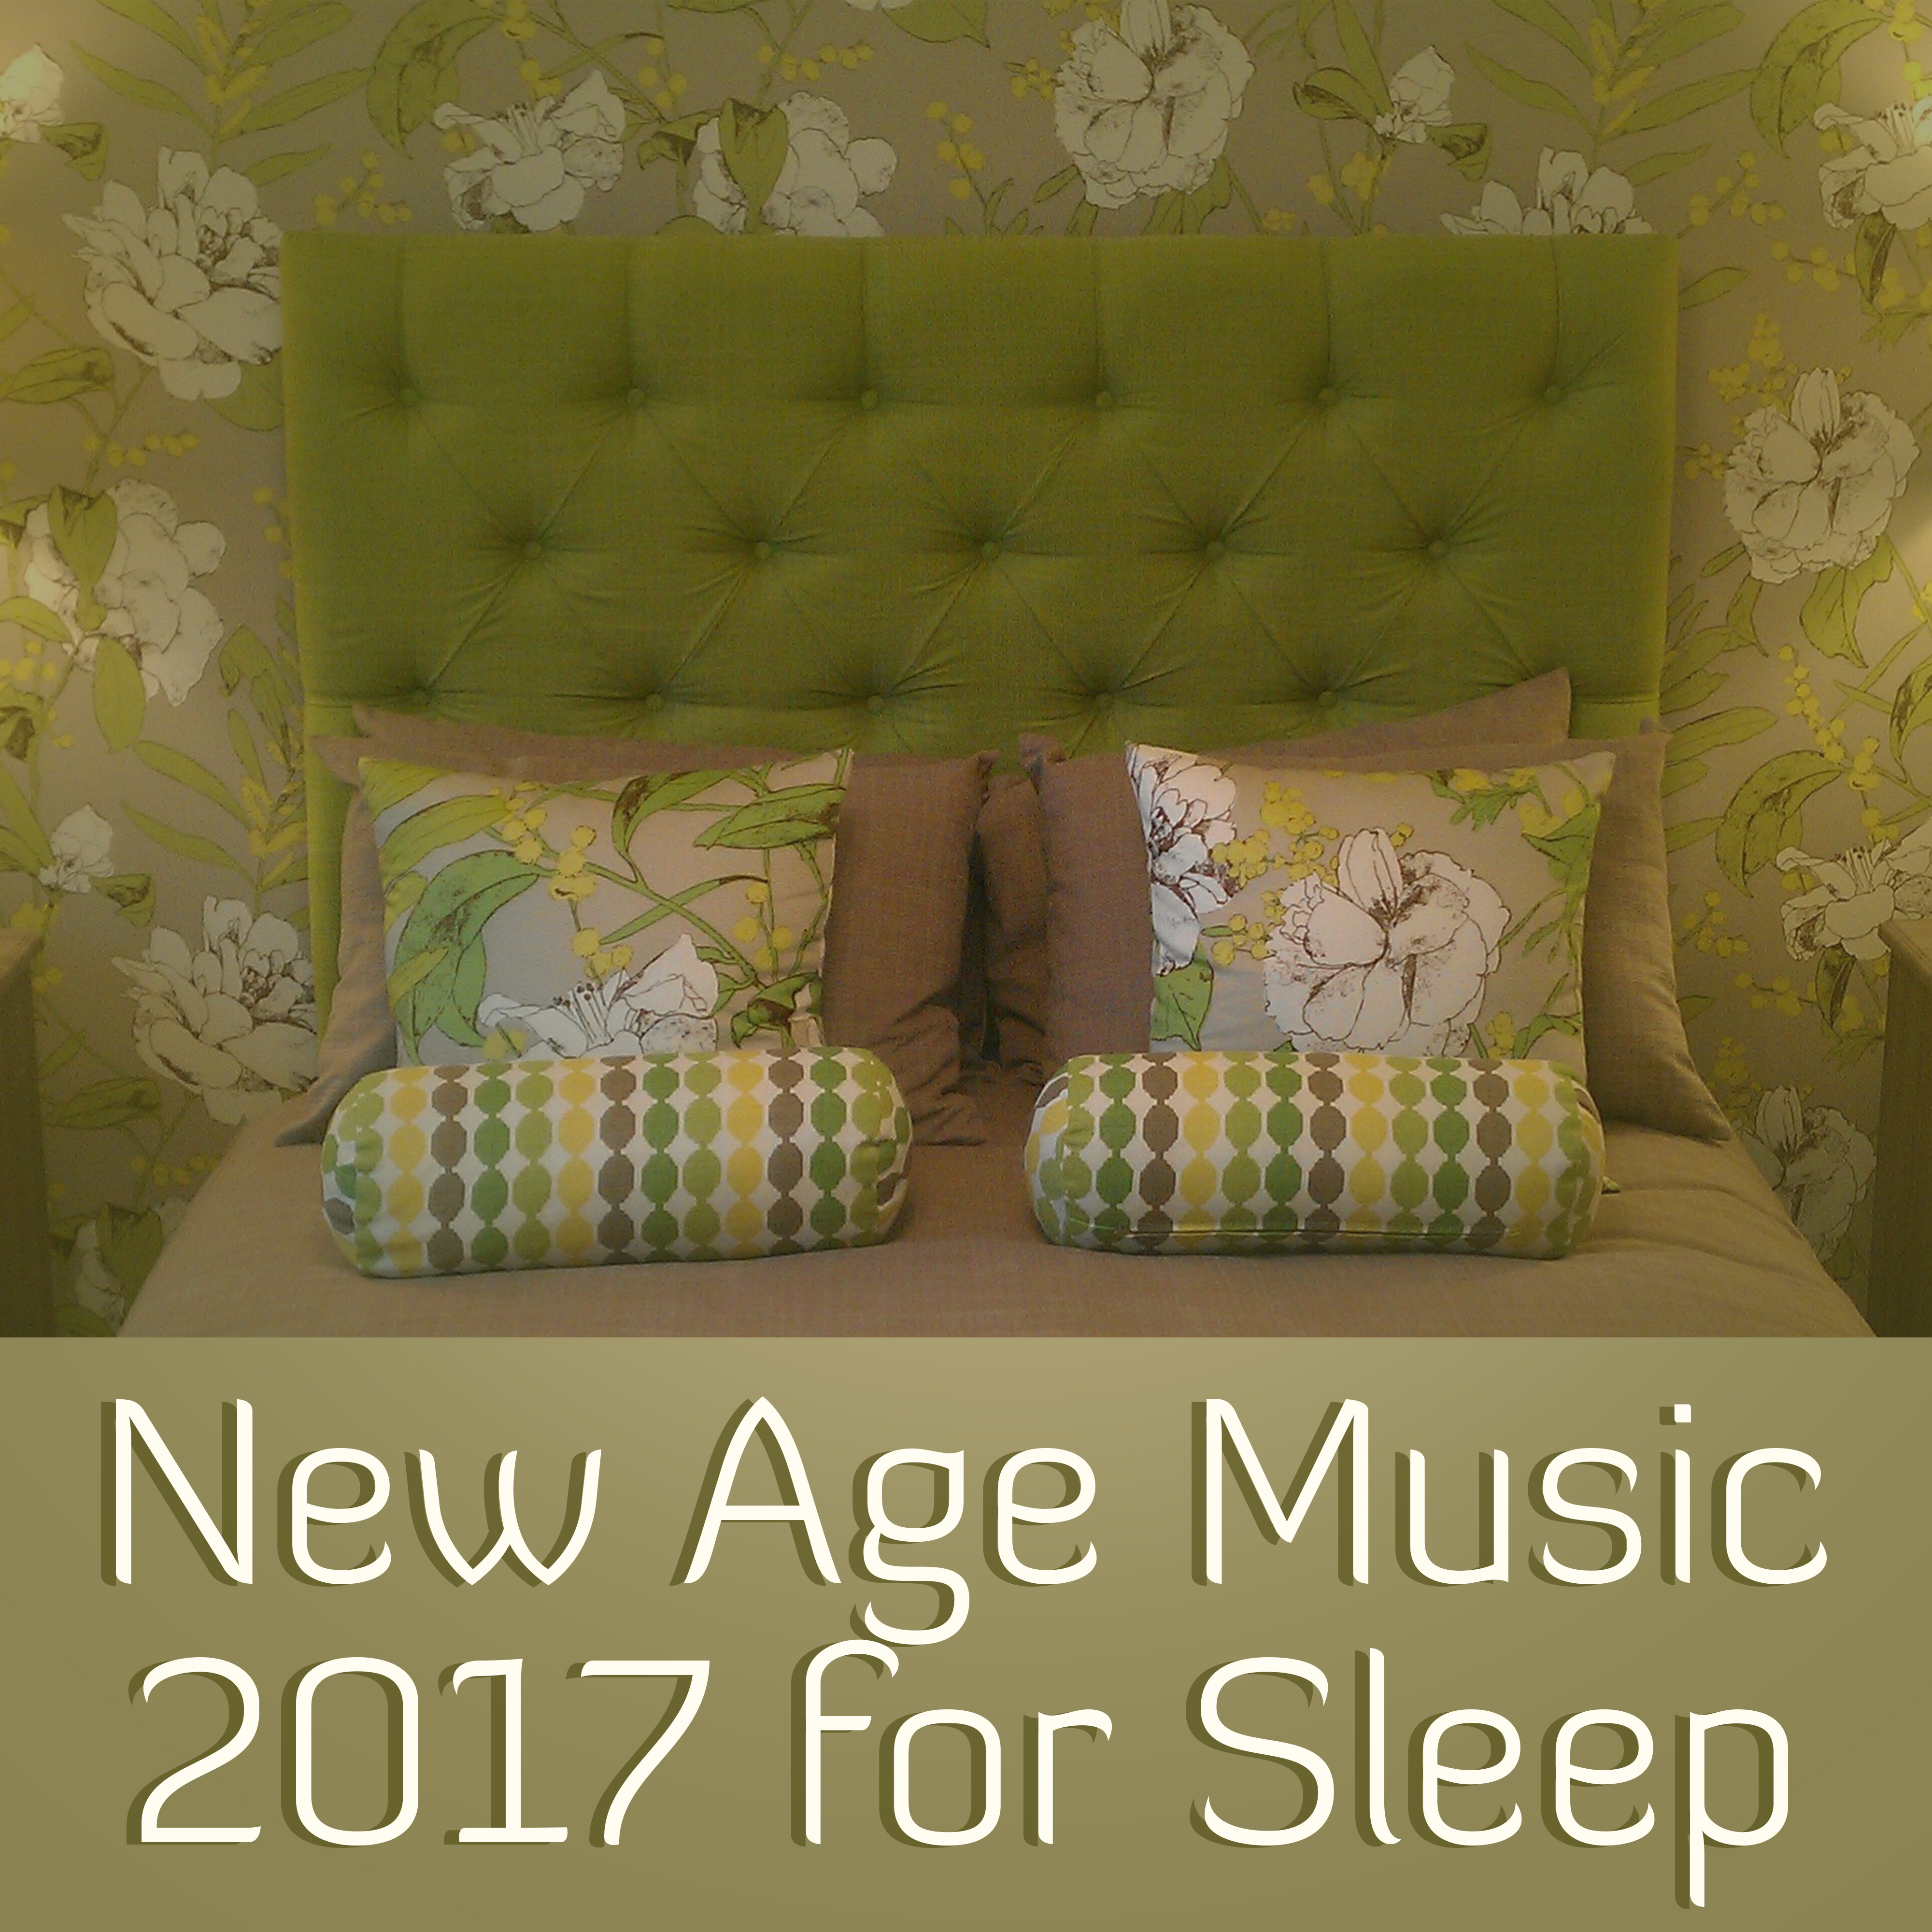 New Age Music 2017 for Sleep  Healing Lullabies to Bed, Soft Songs at Goodnight, Pure Sleep, Bedtime, Peaceful Music for Relaxation